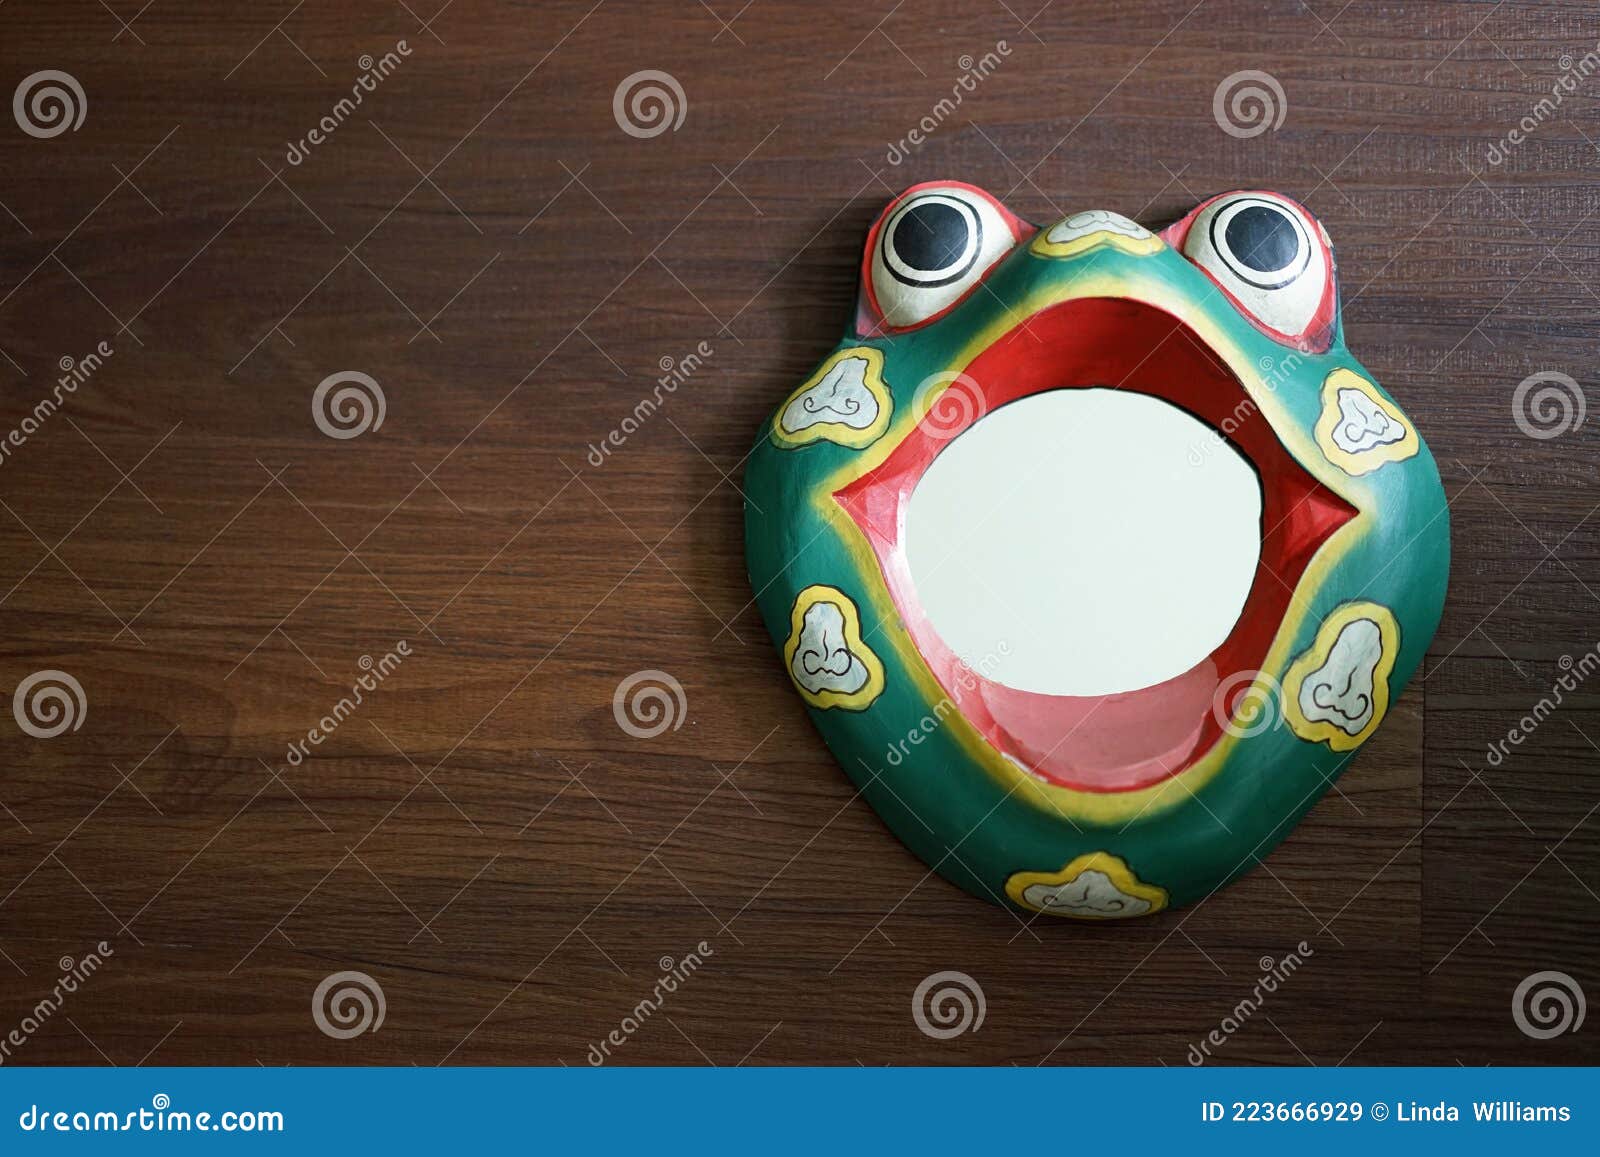 Colorful Frog Mirror Adds Special Meaning To Decor Stock Image ...